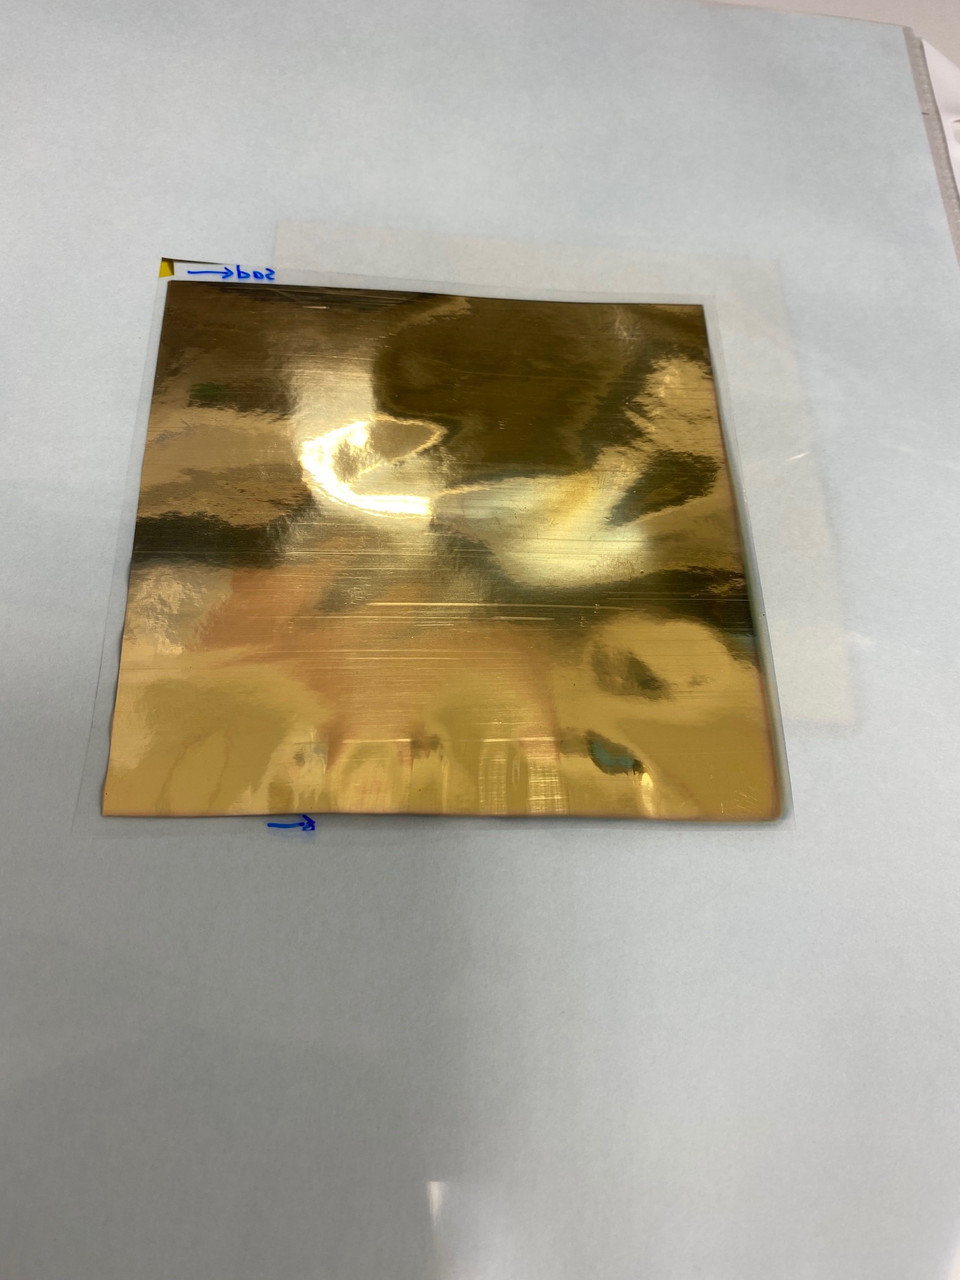 PVDF poled piezoelectric film, 120 mm x 120 mm, Gold Electrode Both surfaces, Uniaxially Oriented with high d31